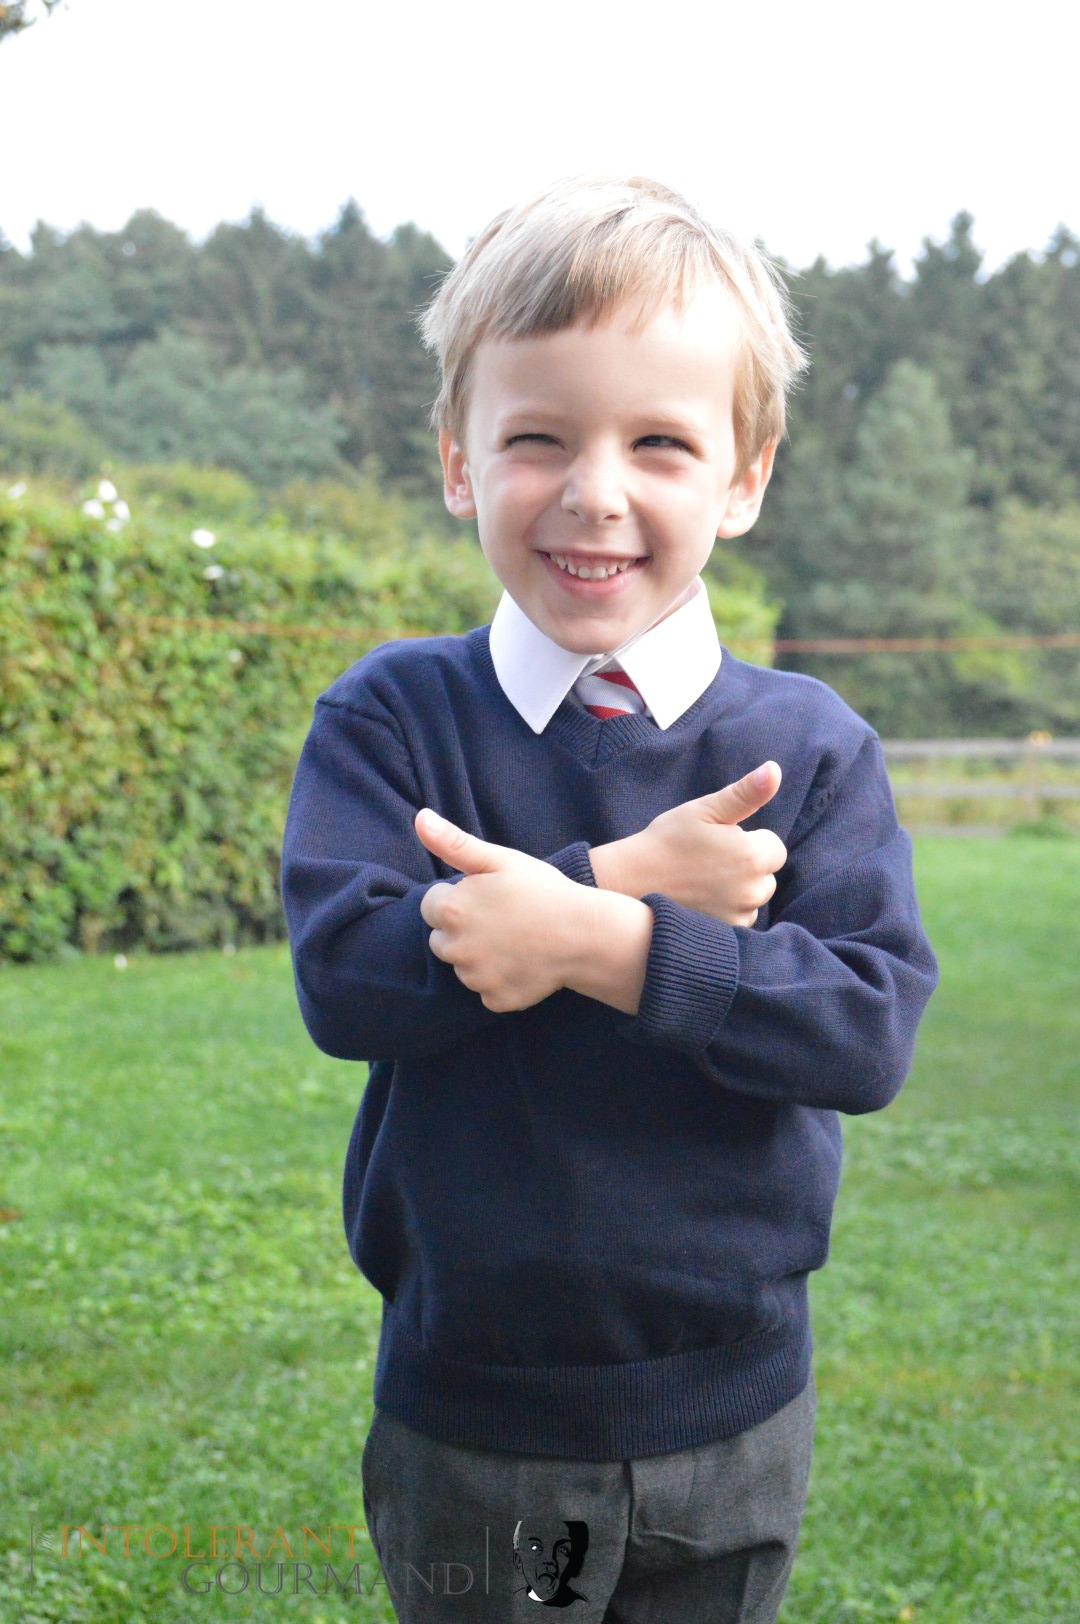 Starting school - the first day of term and all the prep involved in keeping a little one with allergies safe can be a minfield. I've put together my top 10 tips for making it run more smoothly! www.intolerantgourmand.com